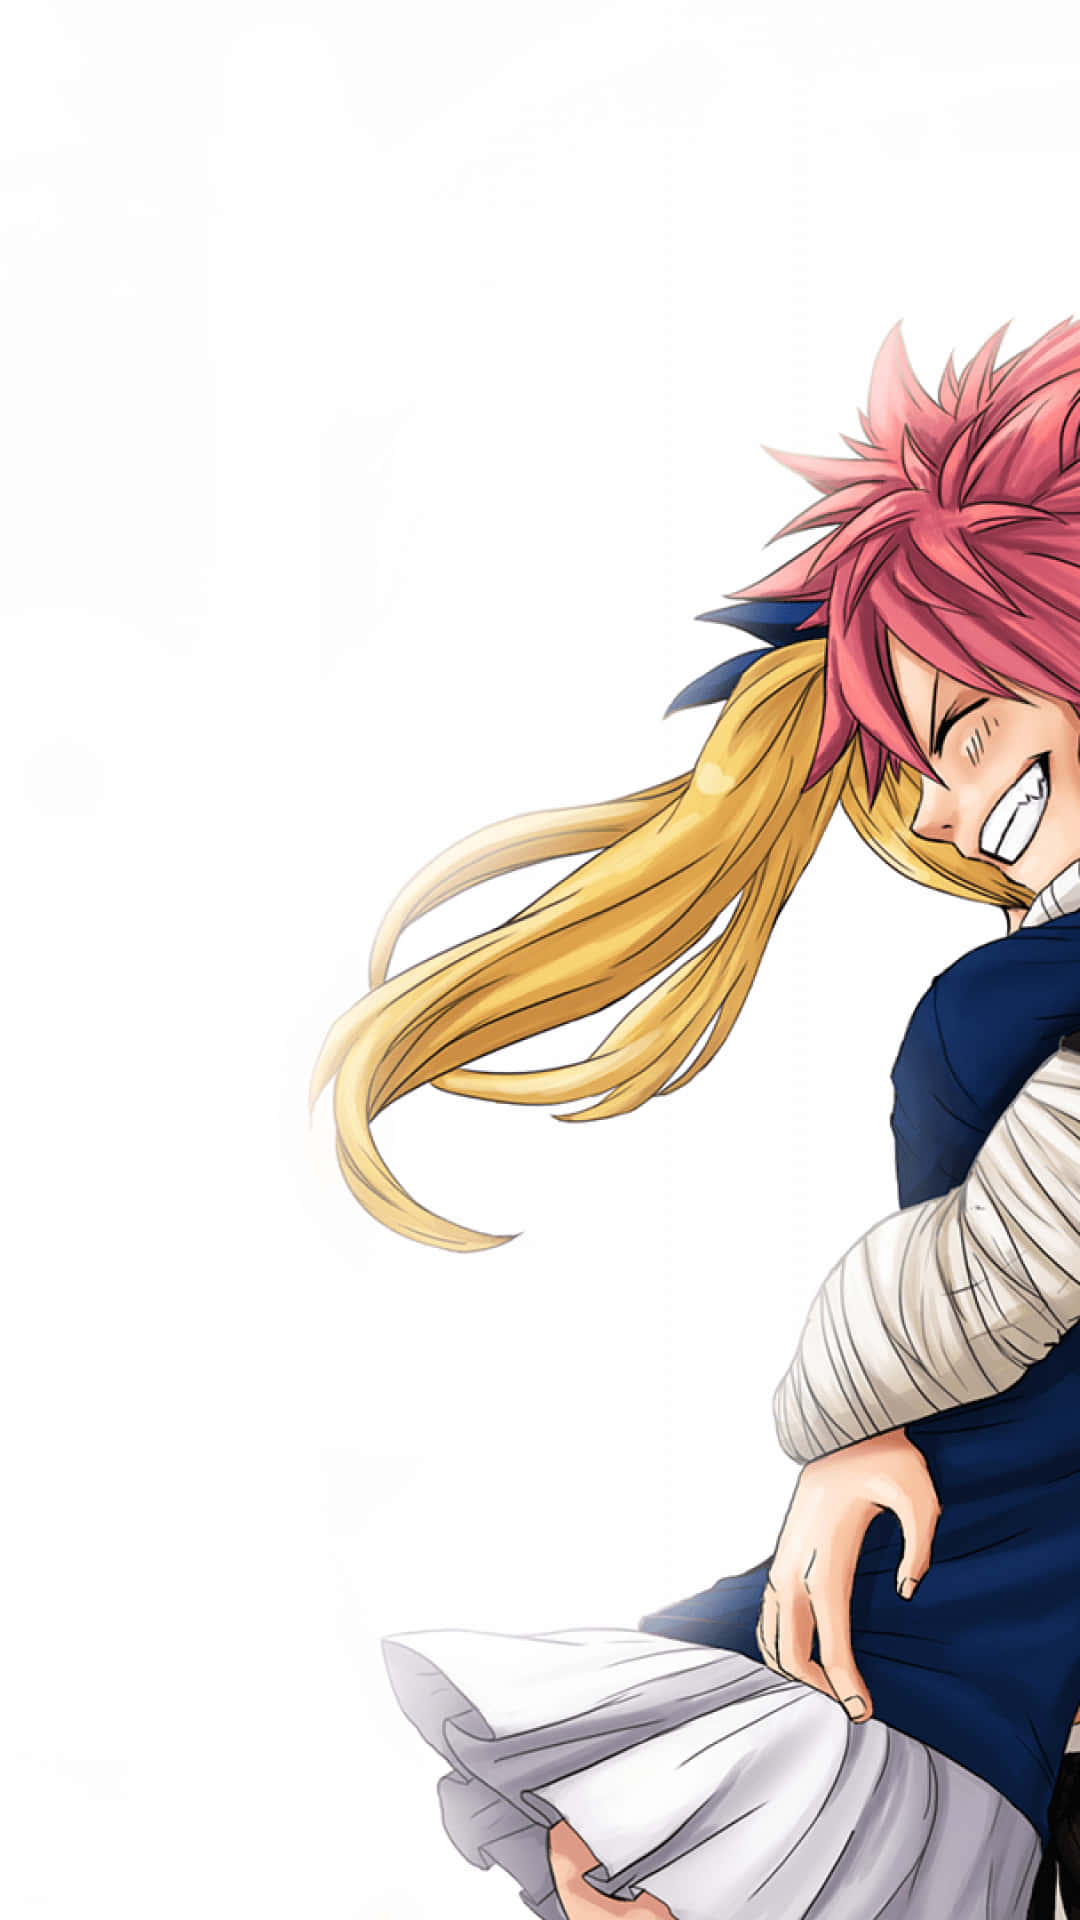 Free Fairy Tail Wallpaper Downloads, [100+] Fairy Tail Wallpapers for FREE  